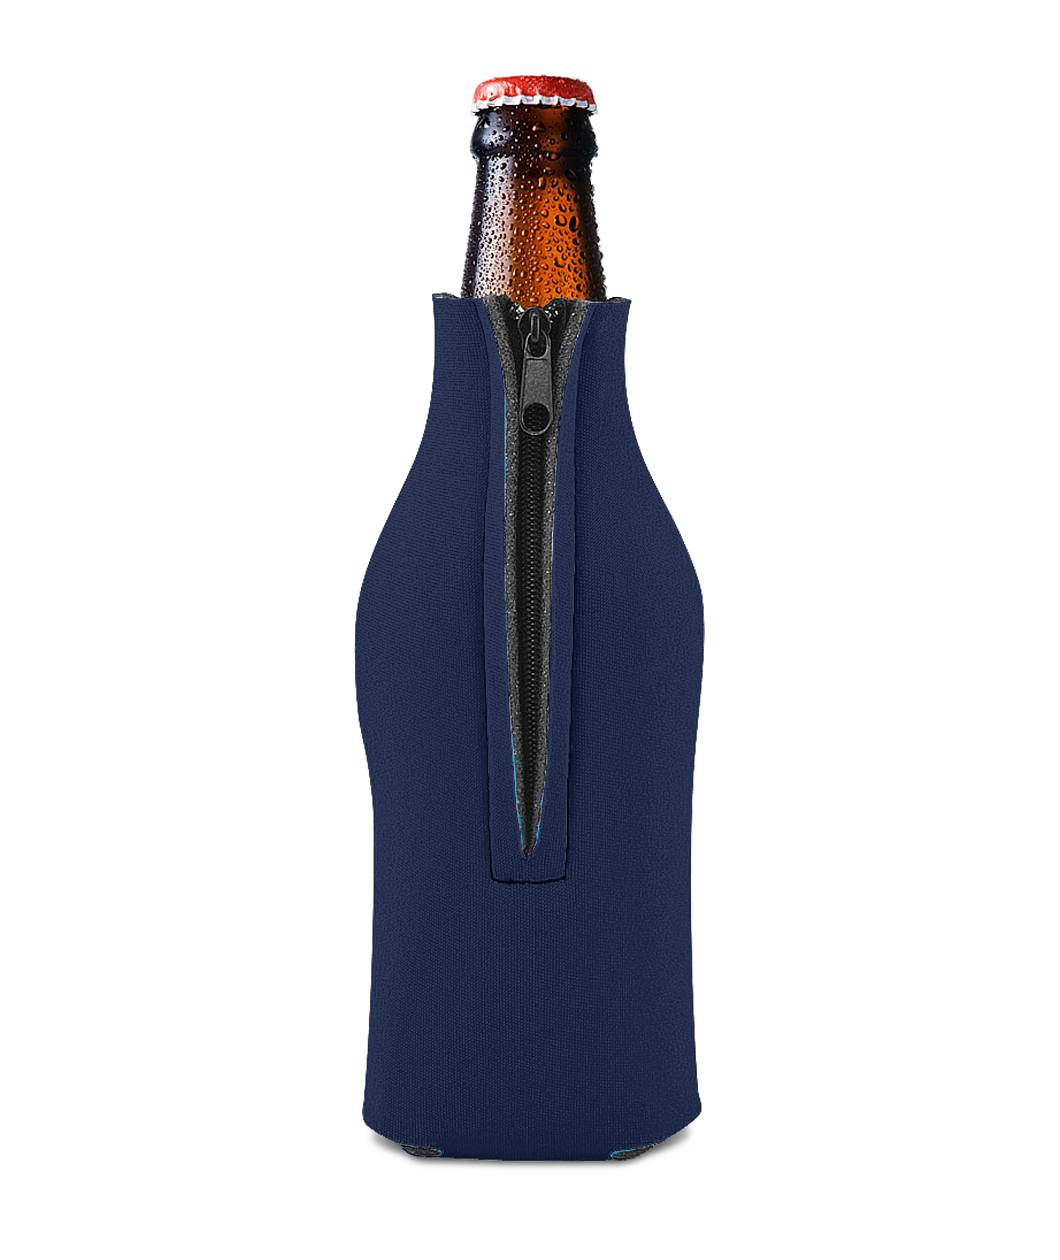 The Hangar Bar and Grill Long Neck Bottle Sleeve